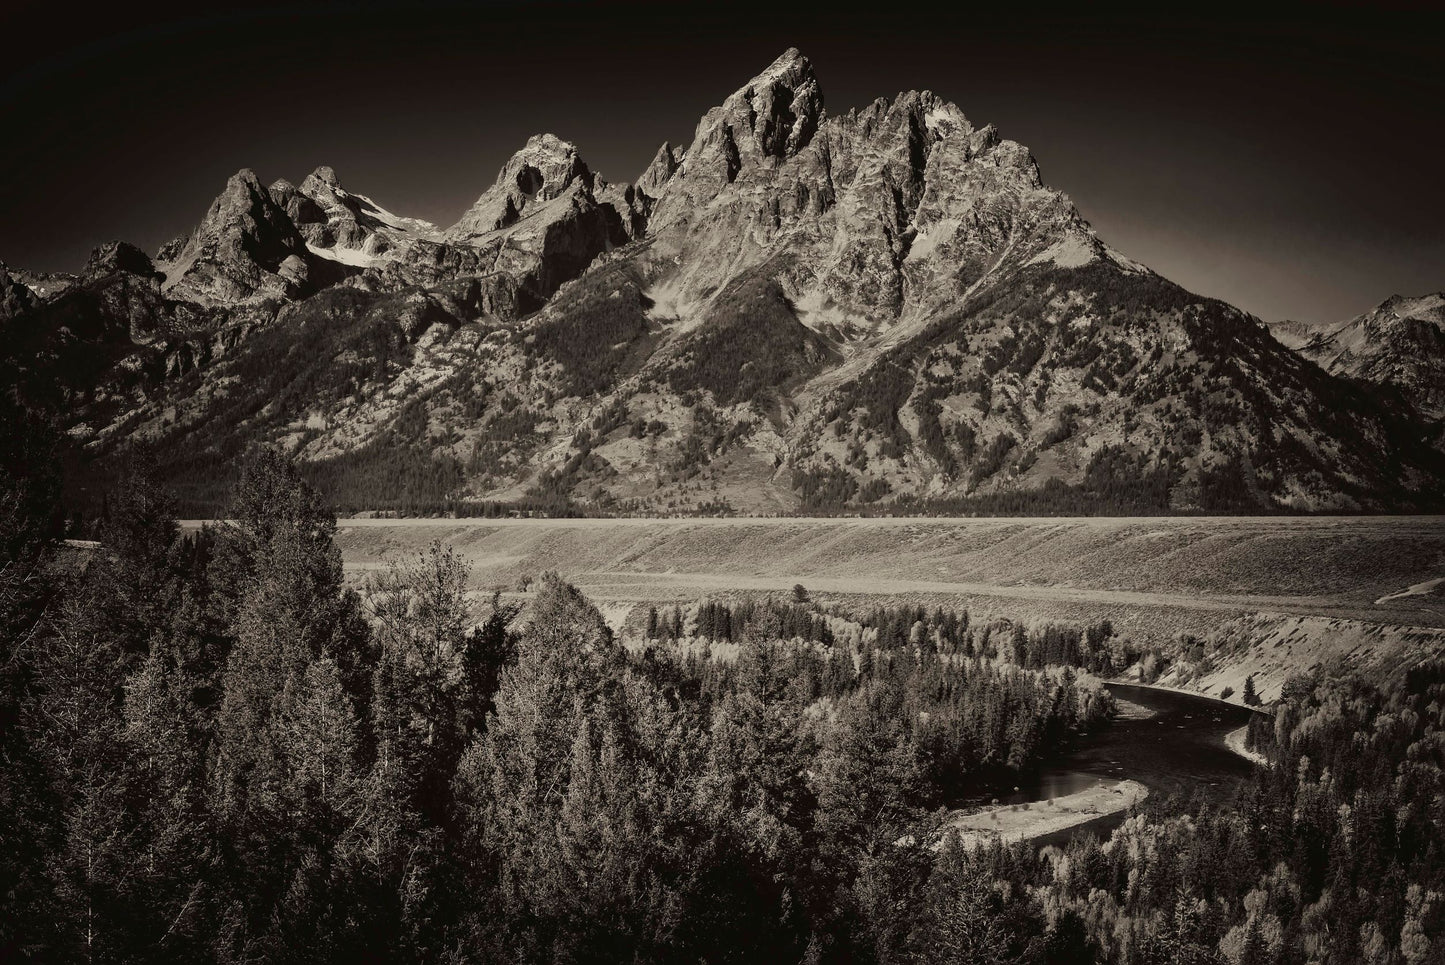 Black and White photo of the infamous Snake River Overlook and Grand Teton in the Grand Teton National Park, Wyoming